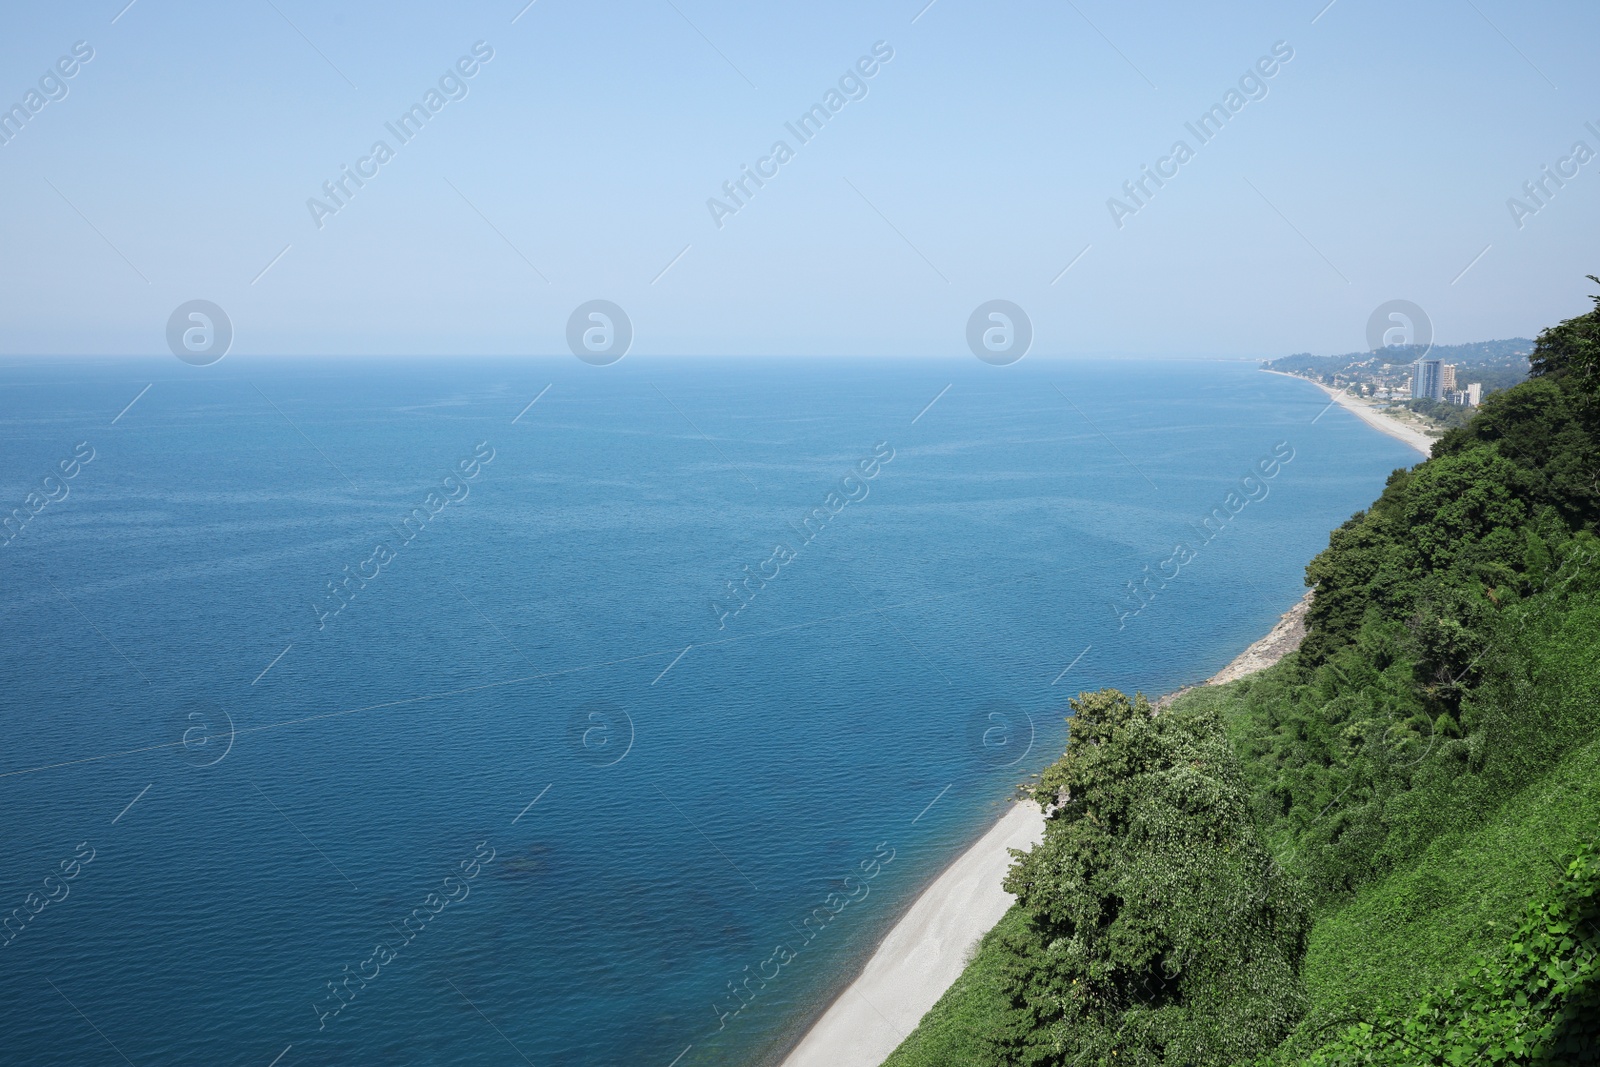 Photo of Picturesque view of green hills and sea with clear water